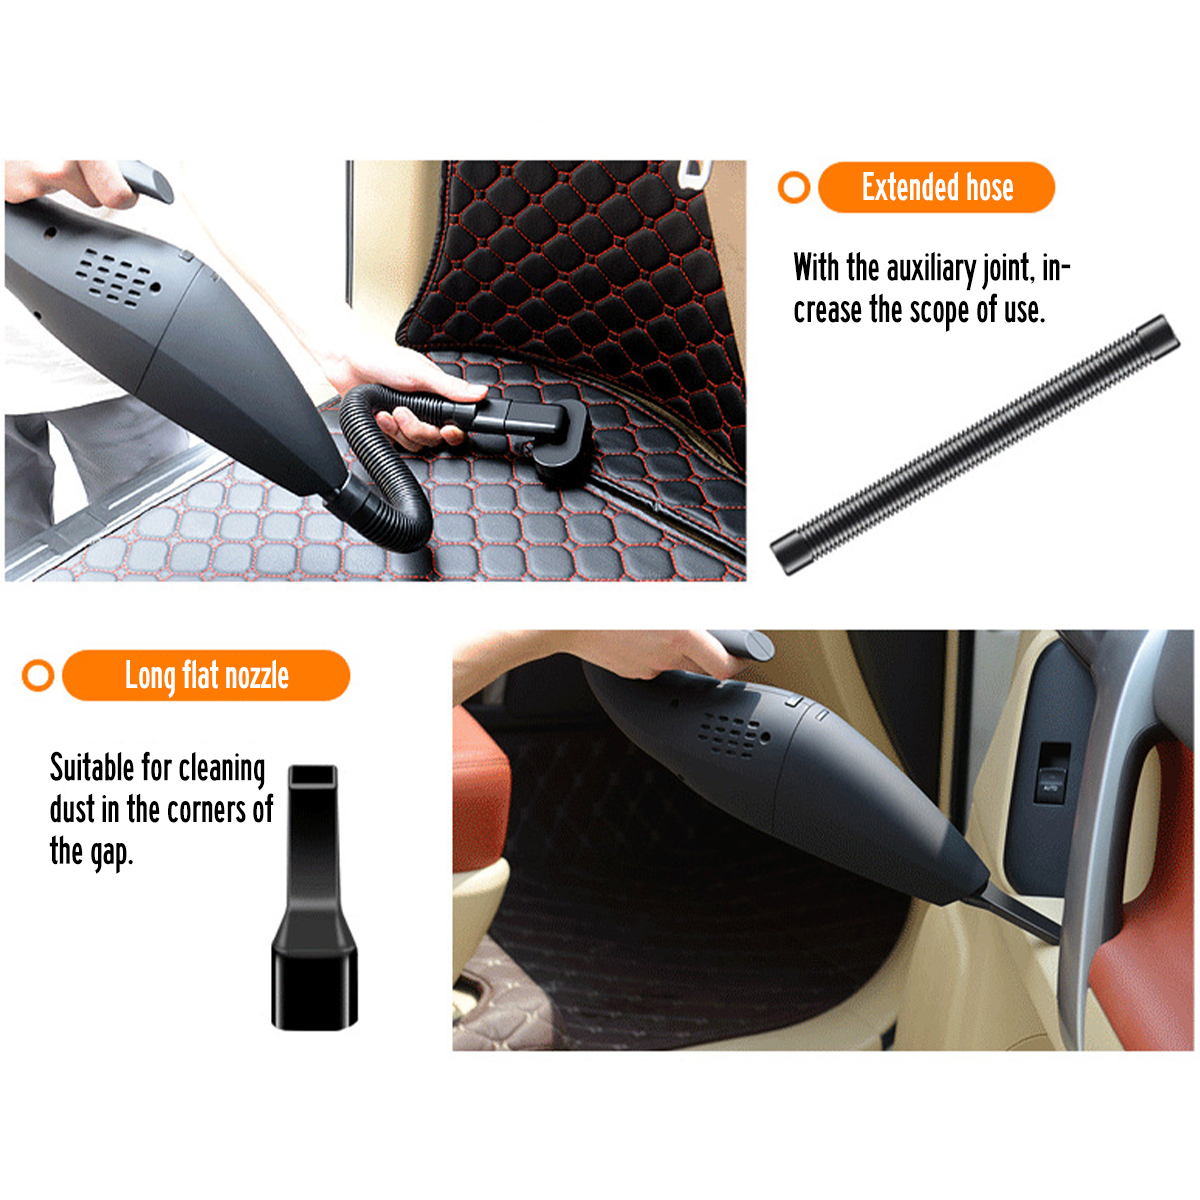 110-240V-120W-Handheld-Car-Wireless-Vacuum-Cleaner-With-High-Power-Dual-Purpose-Wet--Dry-Portable-Re-1581227-8